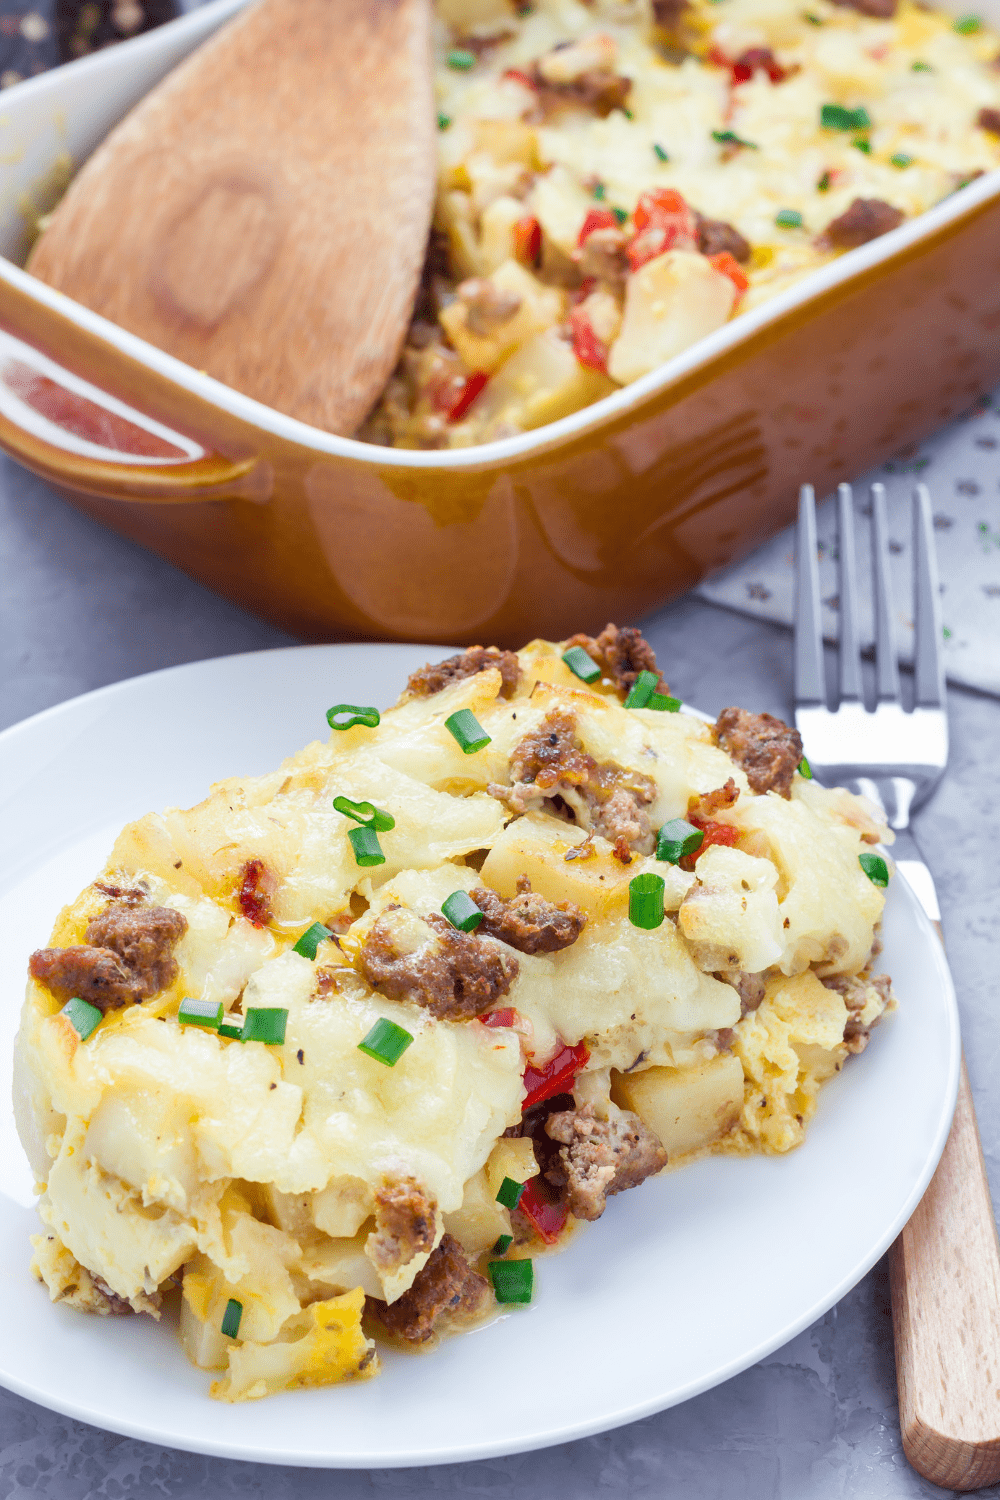 Breakfast casserole: egg, potatoes and sausages